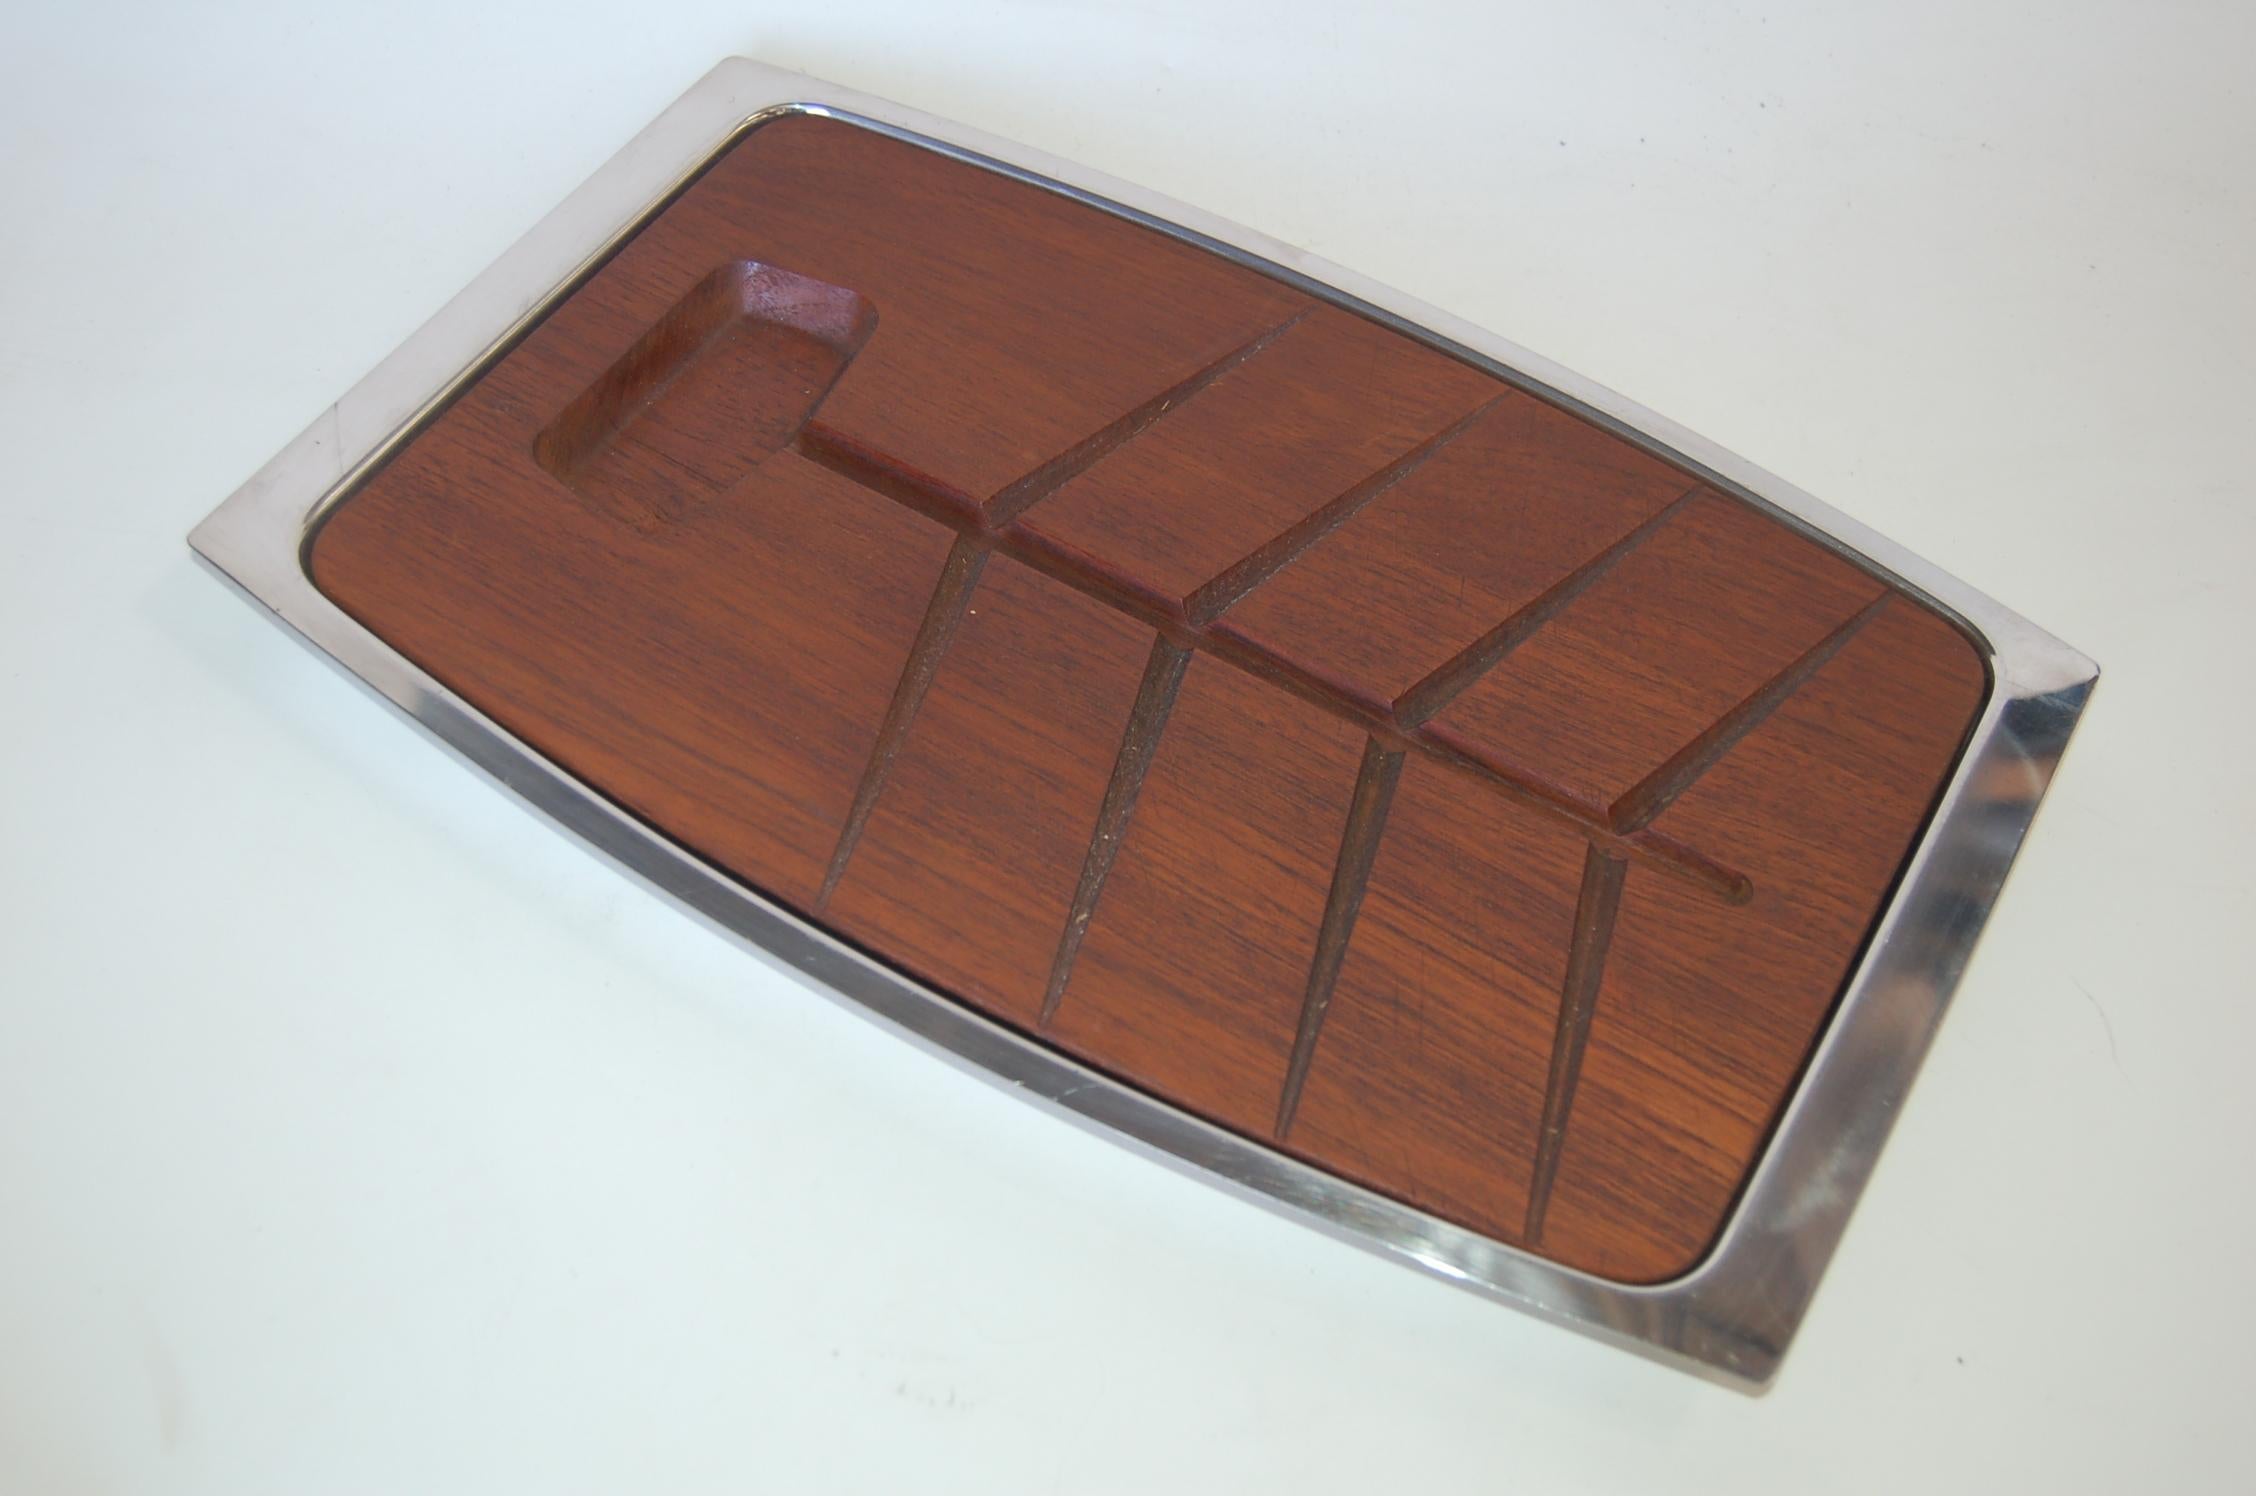 Danish modern two-piece teak cutting board with stainless steel tray.

Measures: 1